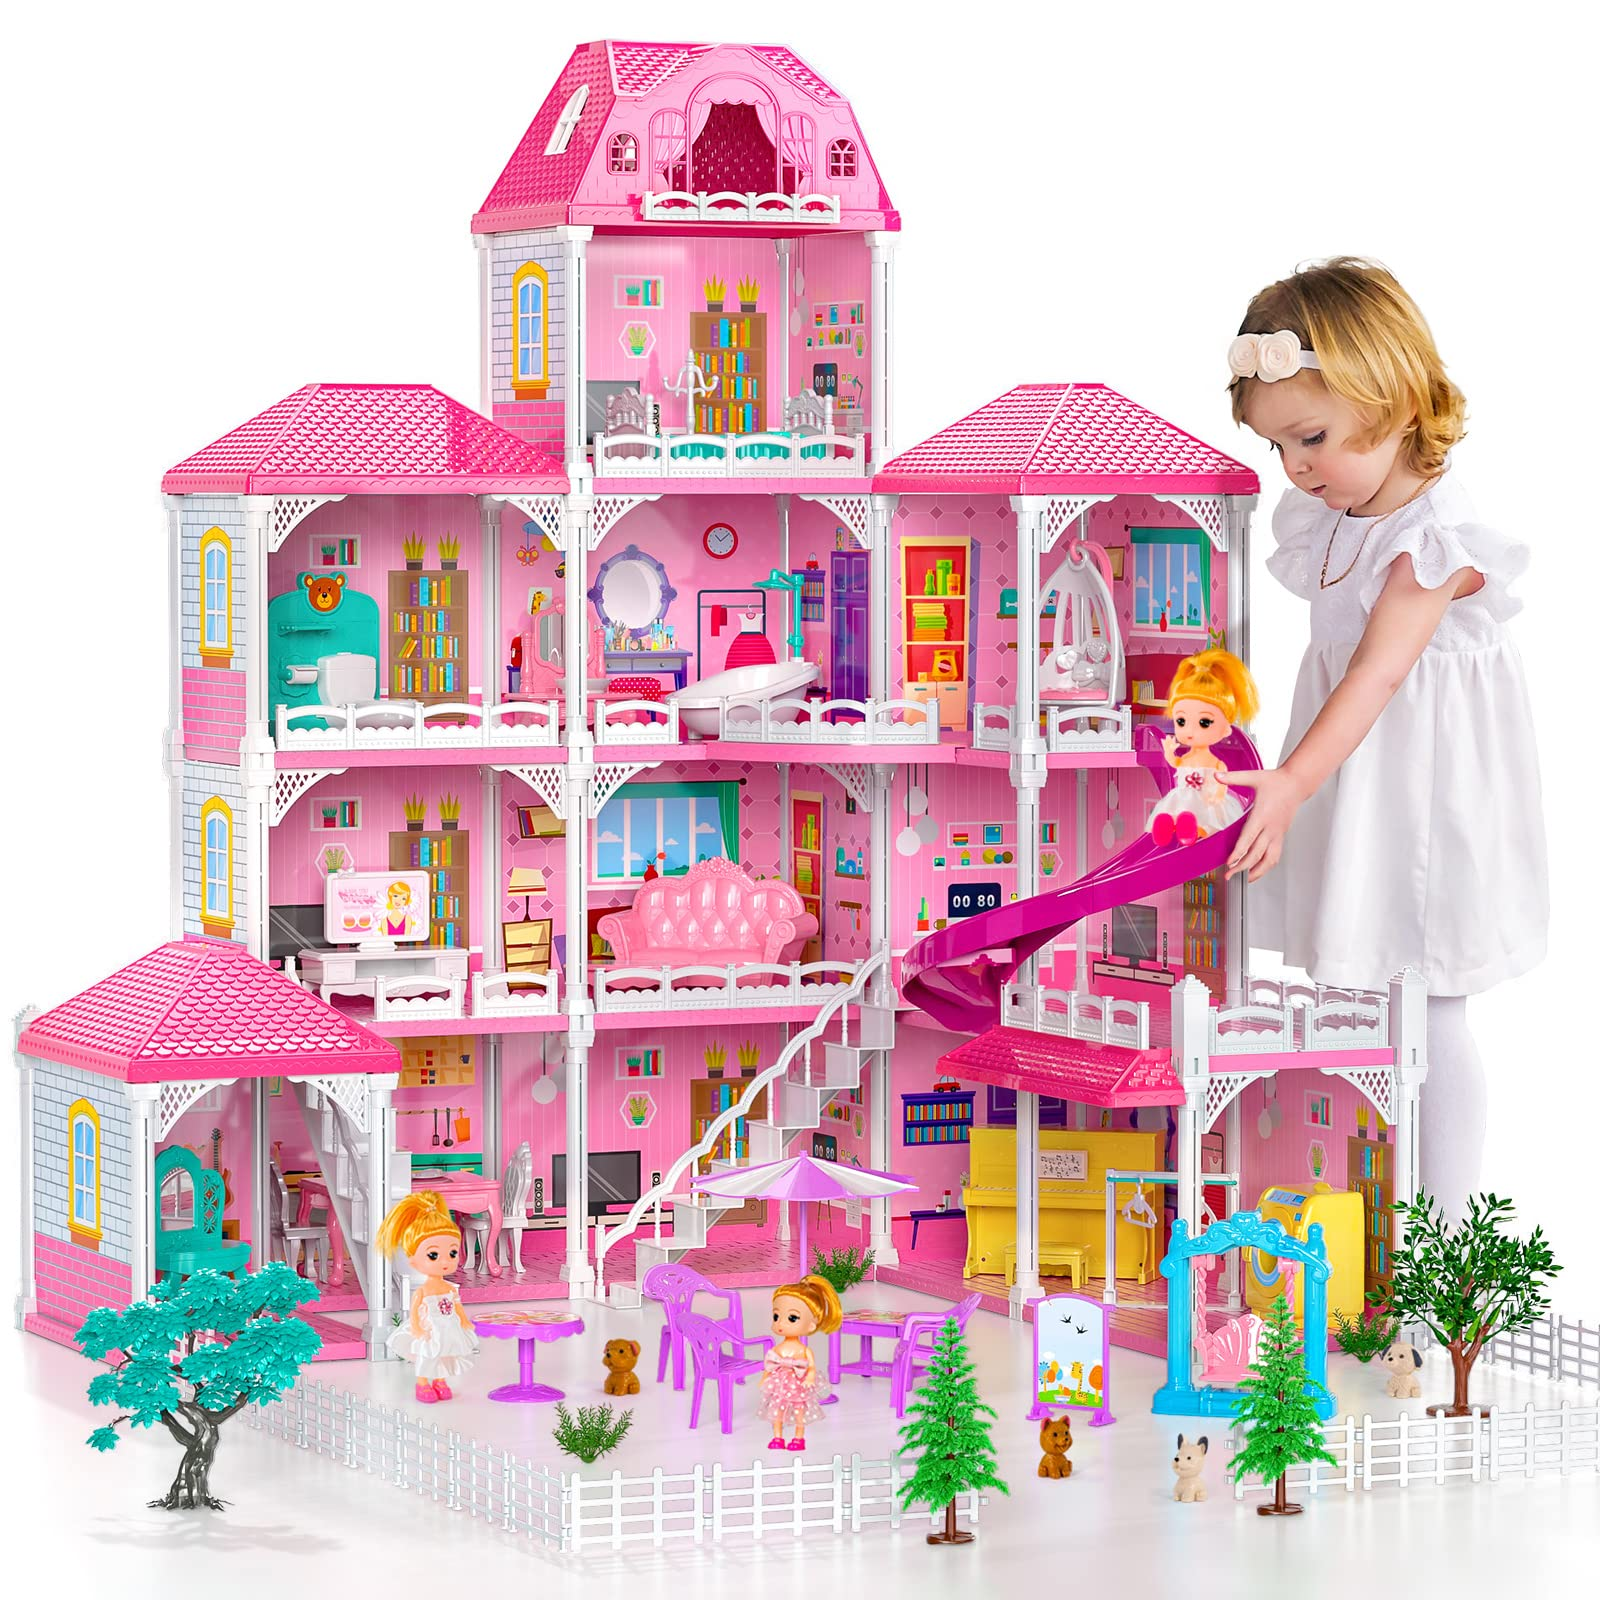 CHILDREN'S DOLL HOUSES - EVERY LITTLE GIRL'S DREAM – Charlotte sy Dimby